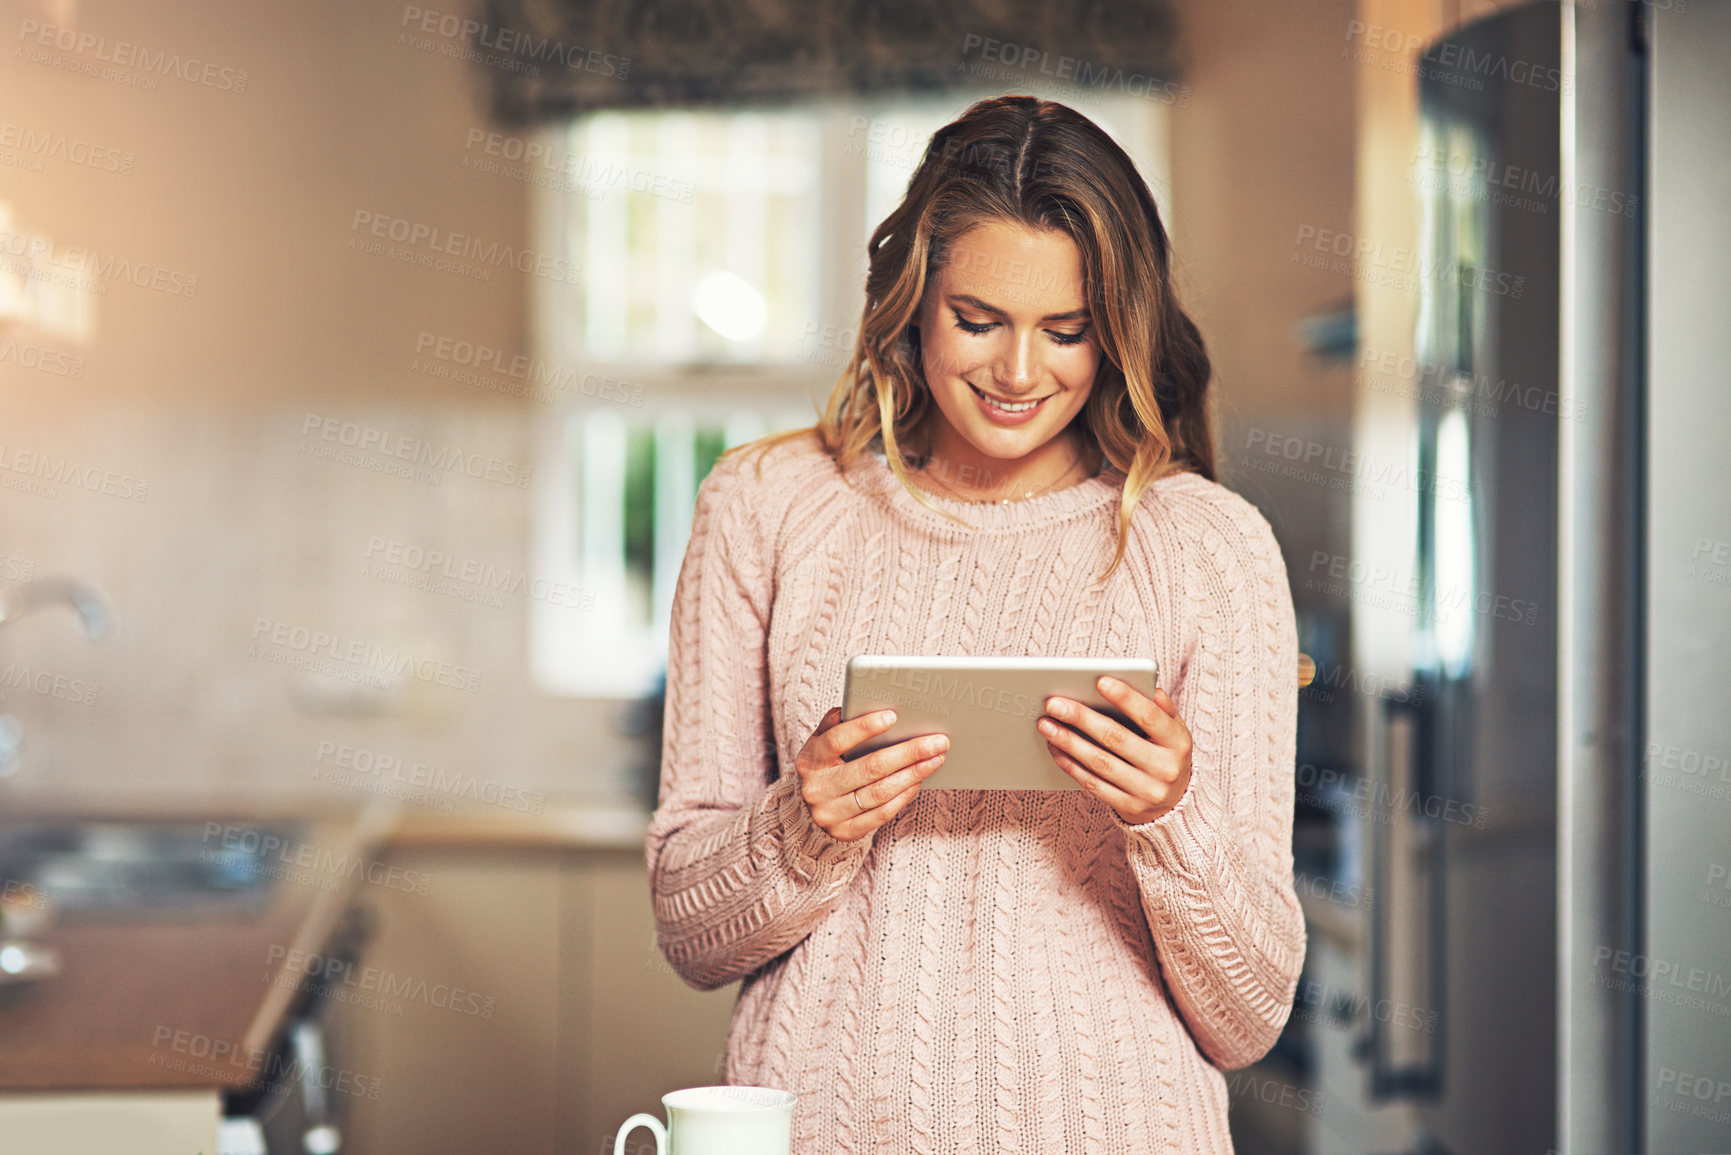 Buy stock photo Shot of a relaxed young woman having coffee and using a smartphone at home